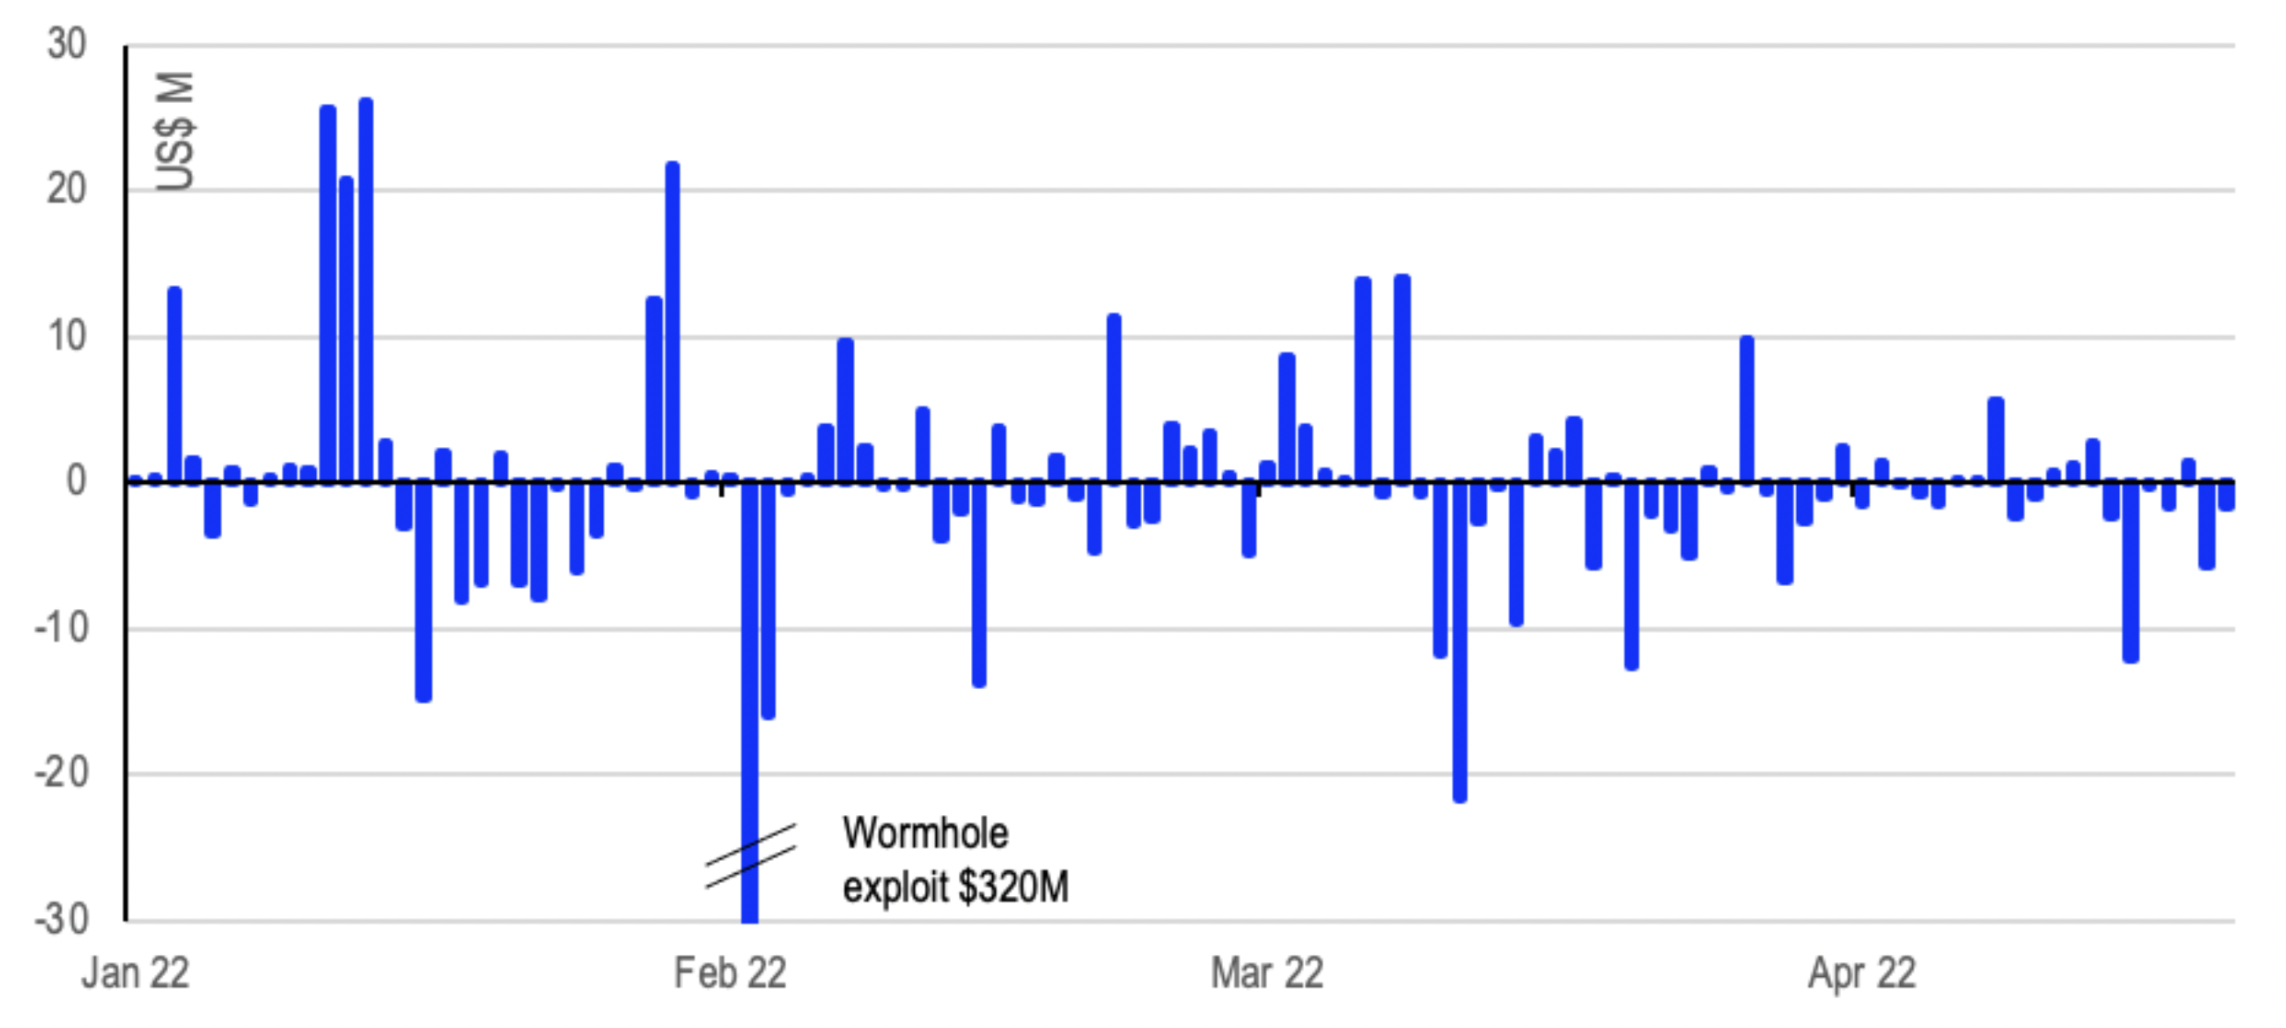 Deposit and withdrawal activity on Wormhole bridge